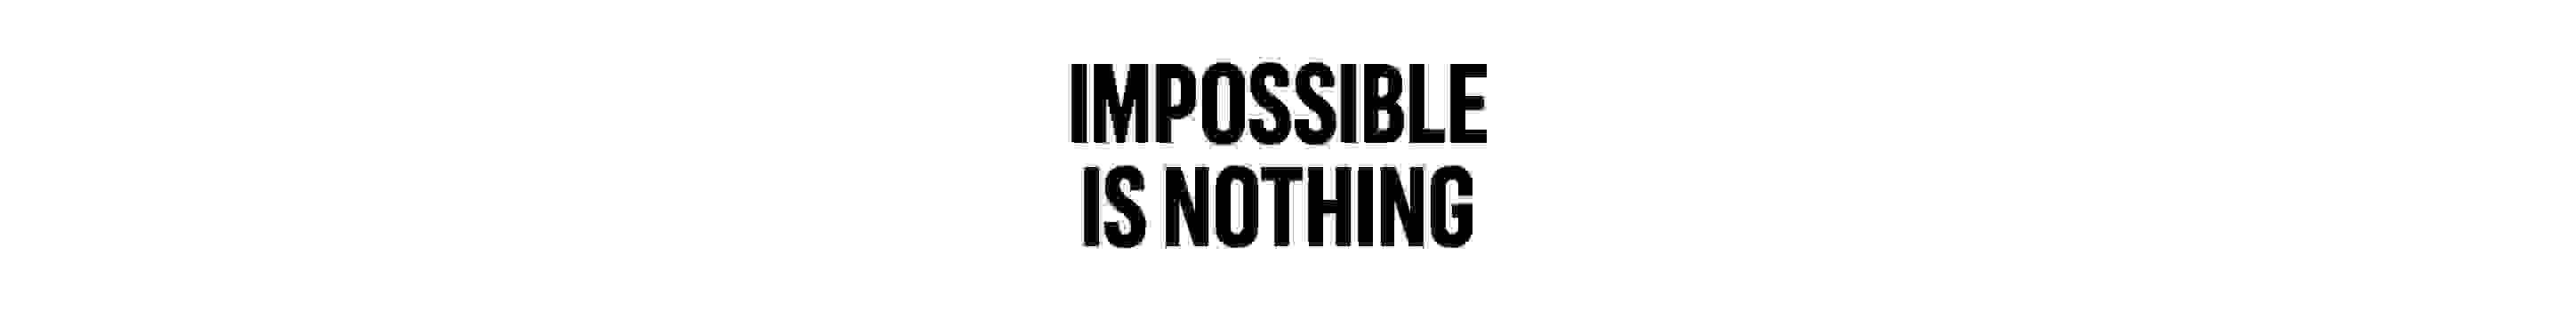 Impossible is nothing logo